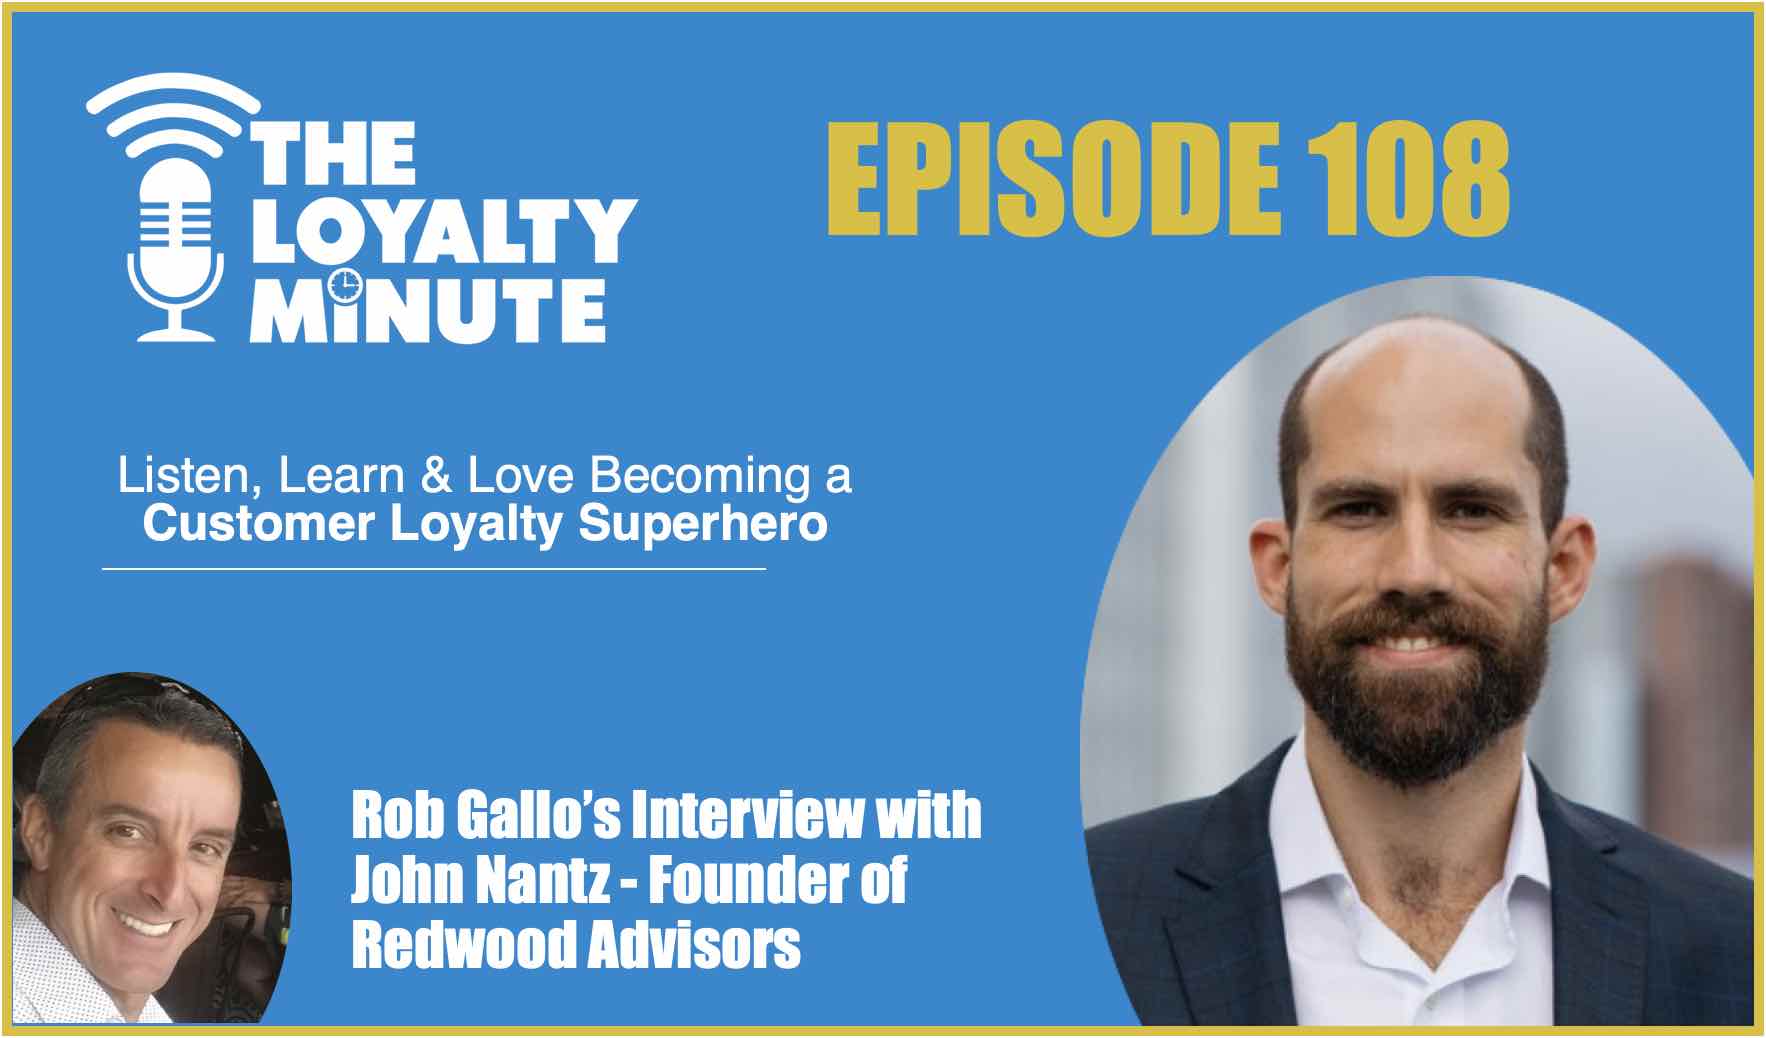 Episode 108 (Interview) with John Nantz – Founder and Strategy Consultant at Redwood Advisors